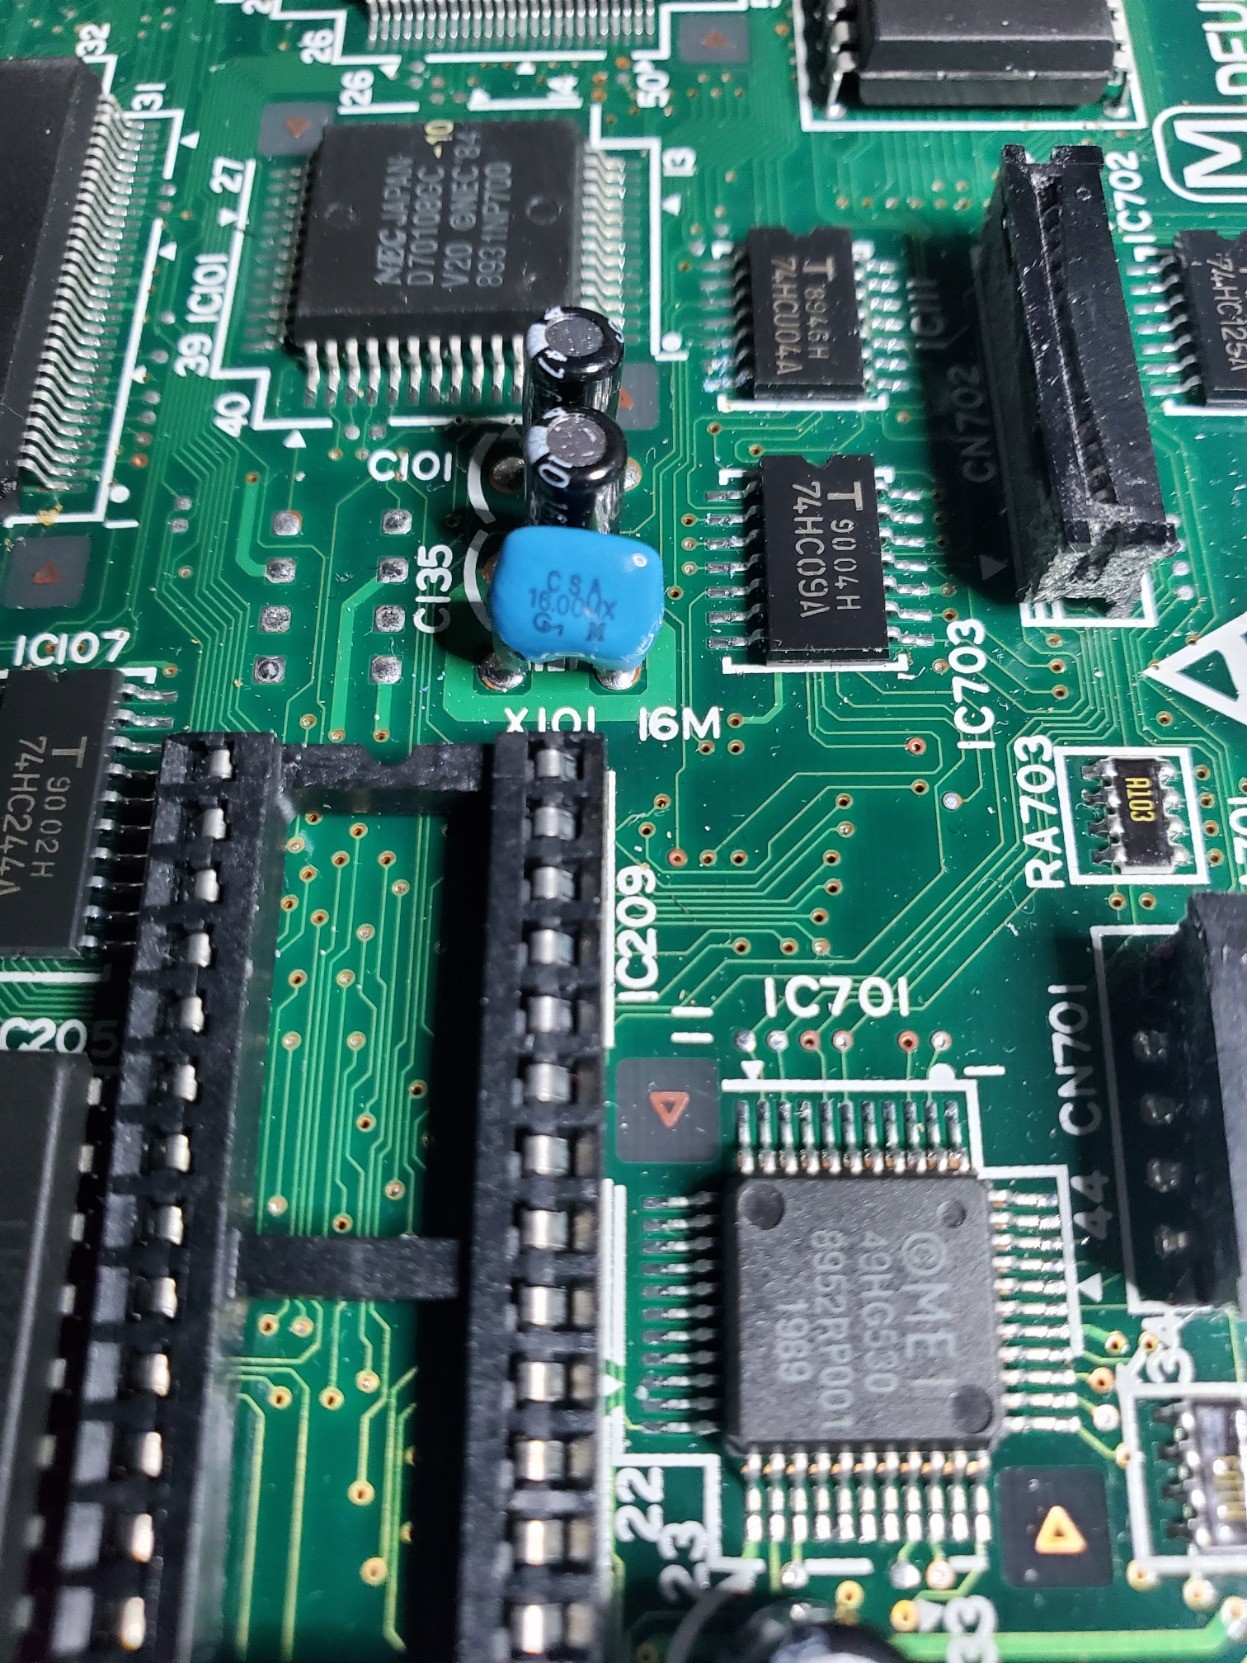 Closeup of the original clock chip in a bright blue package near the ROM socket. Practically invisible is the crack around one of the legs in the blue package.